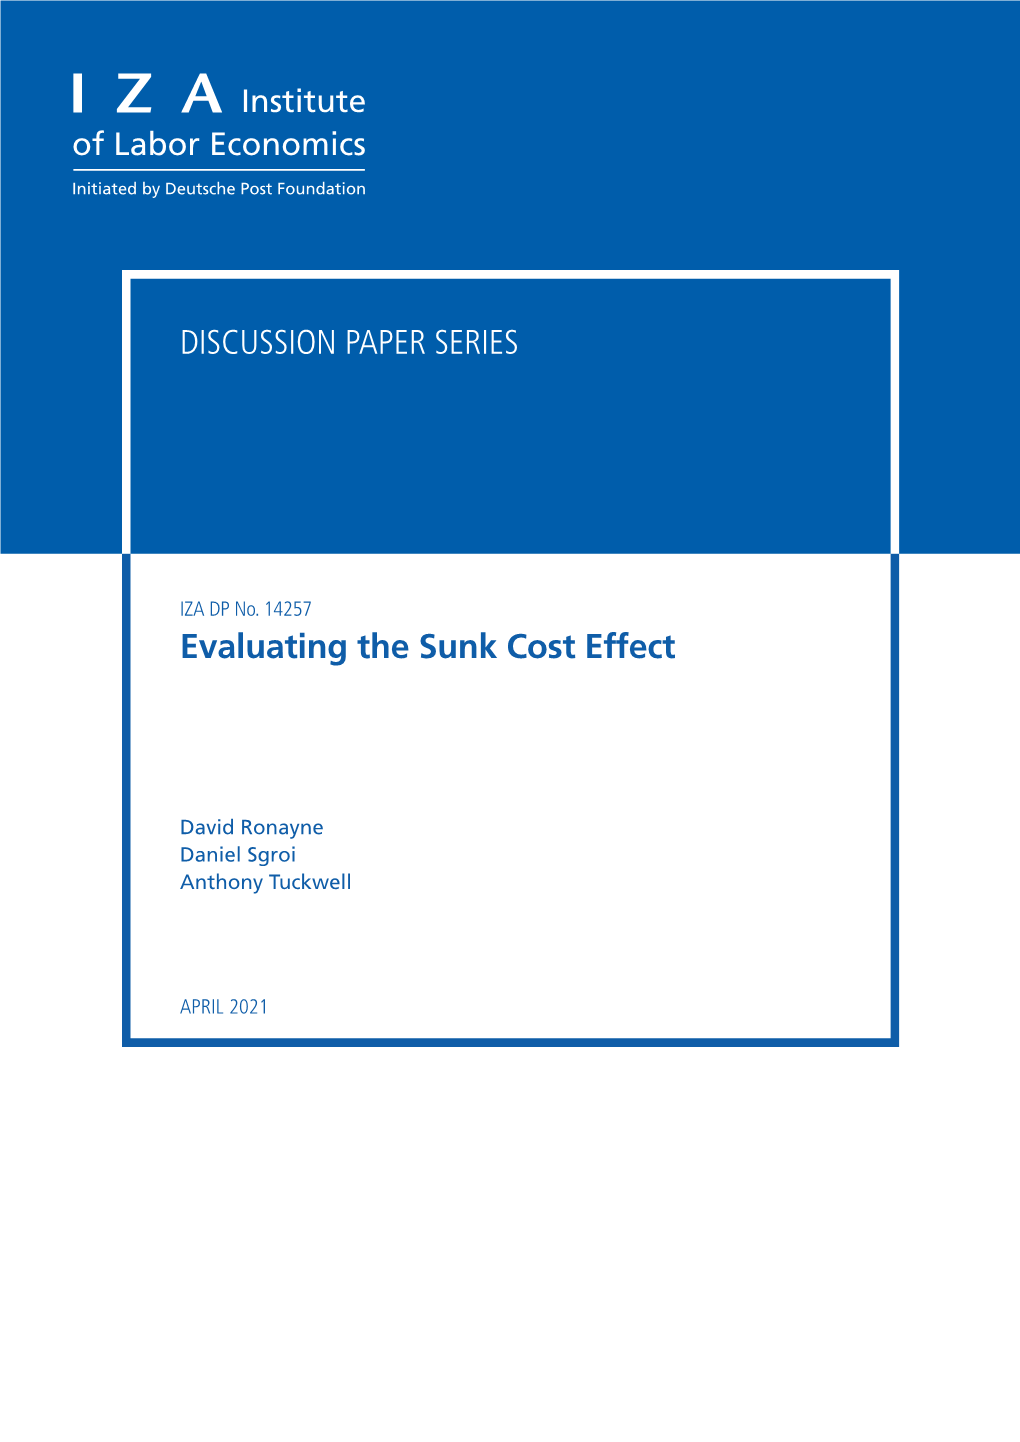 Evaluating the Sunk Cost Effect